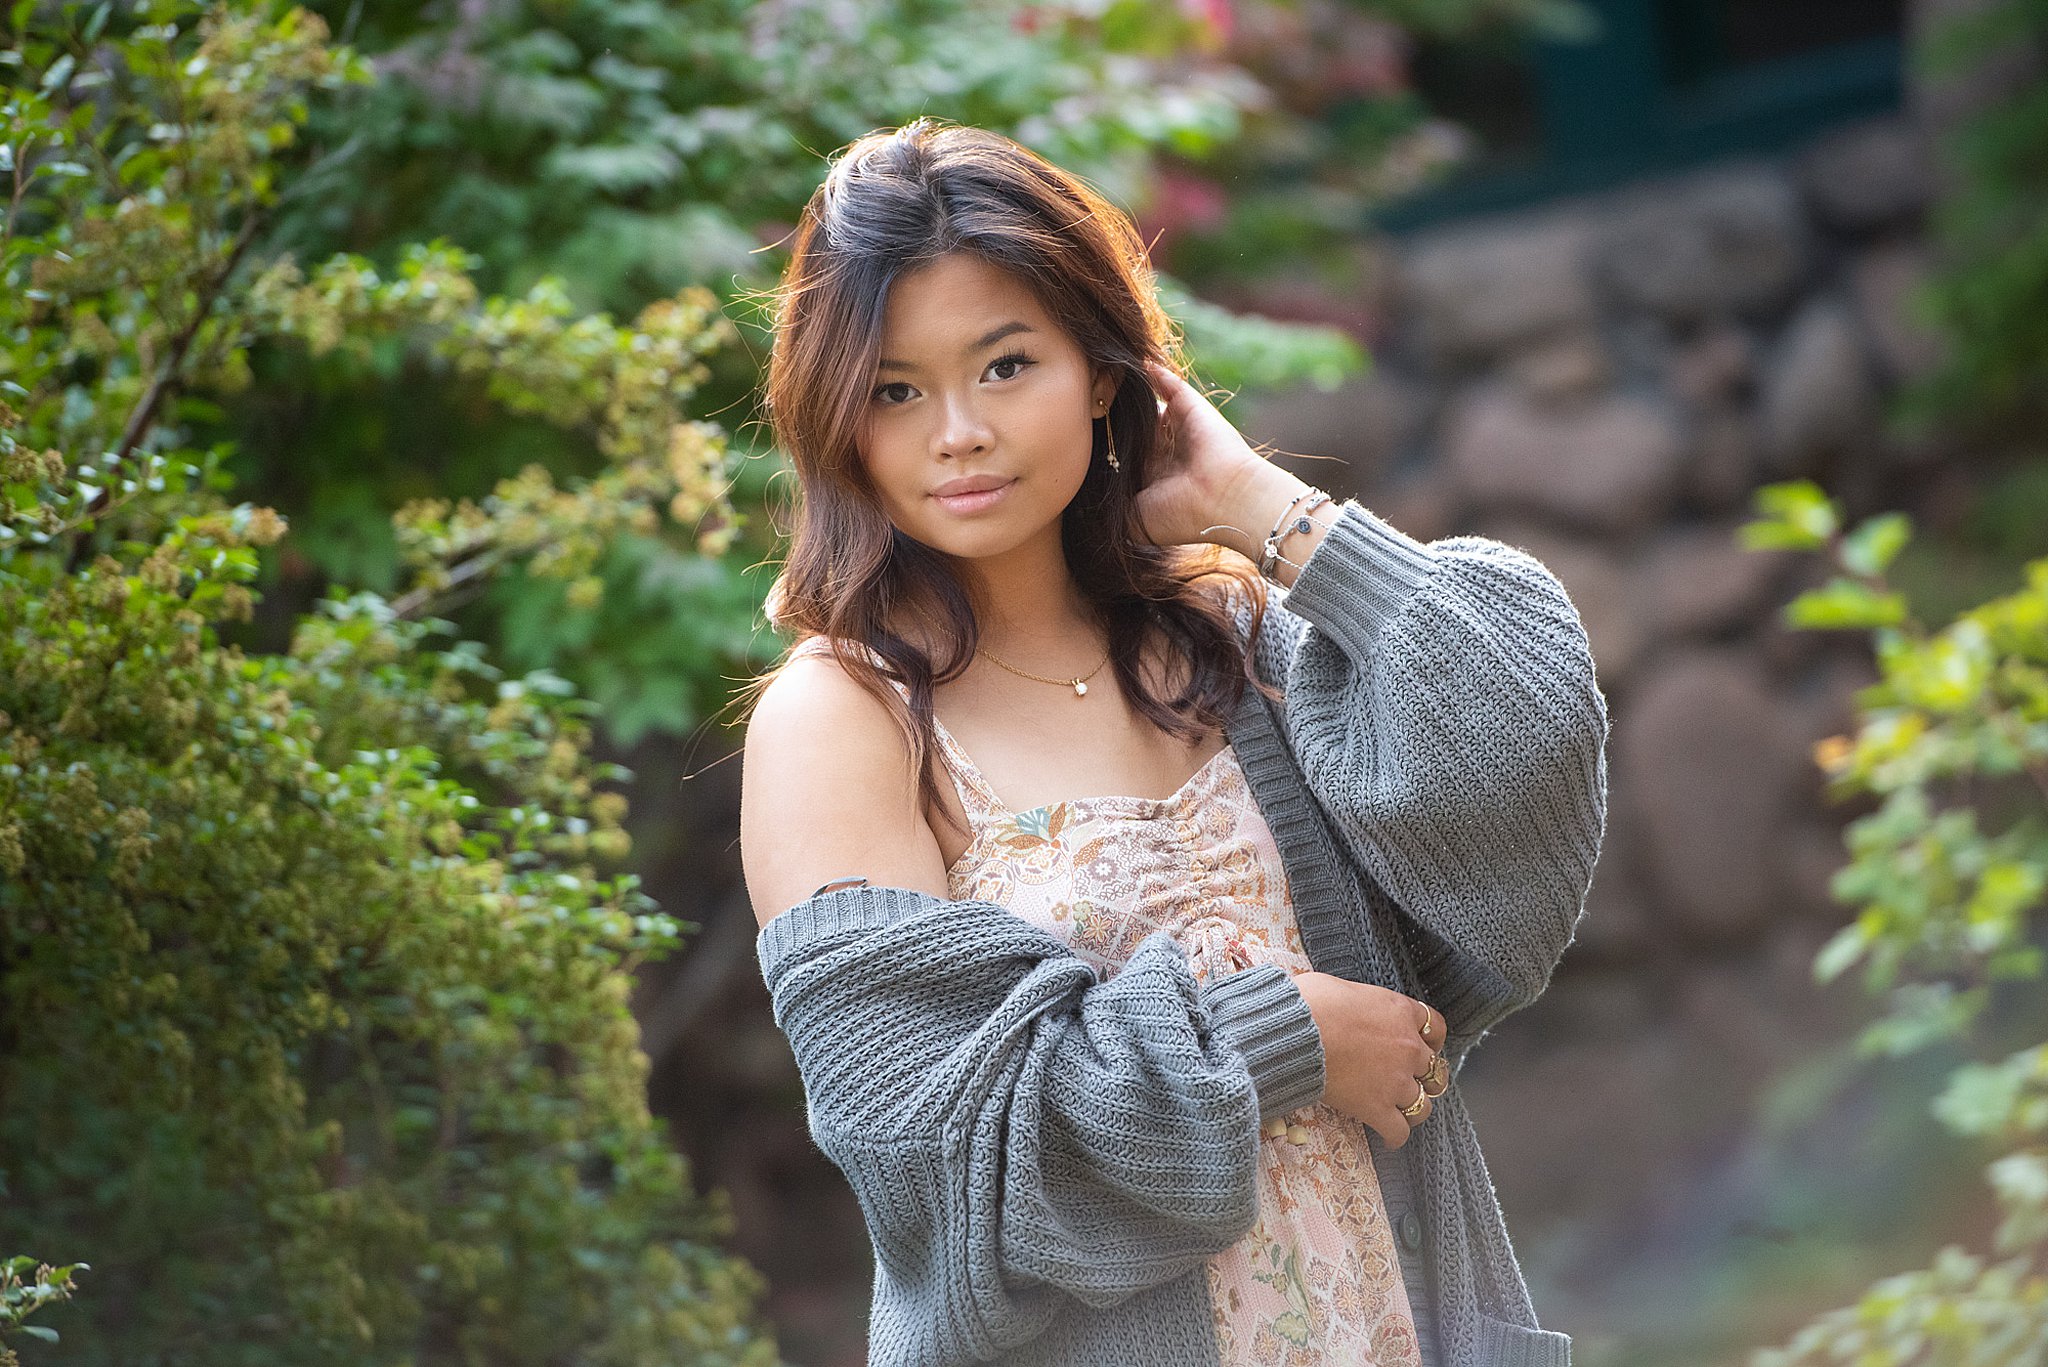 A high school senior in a large grey sweater and tan dress stands in a garden with a hand in her hair after applying for university of colorado colorado springs scholarships